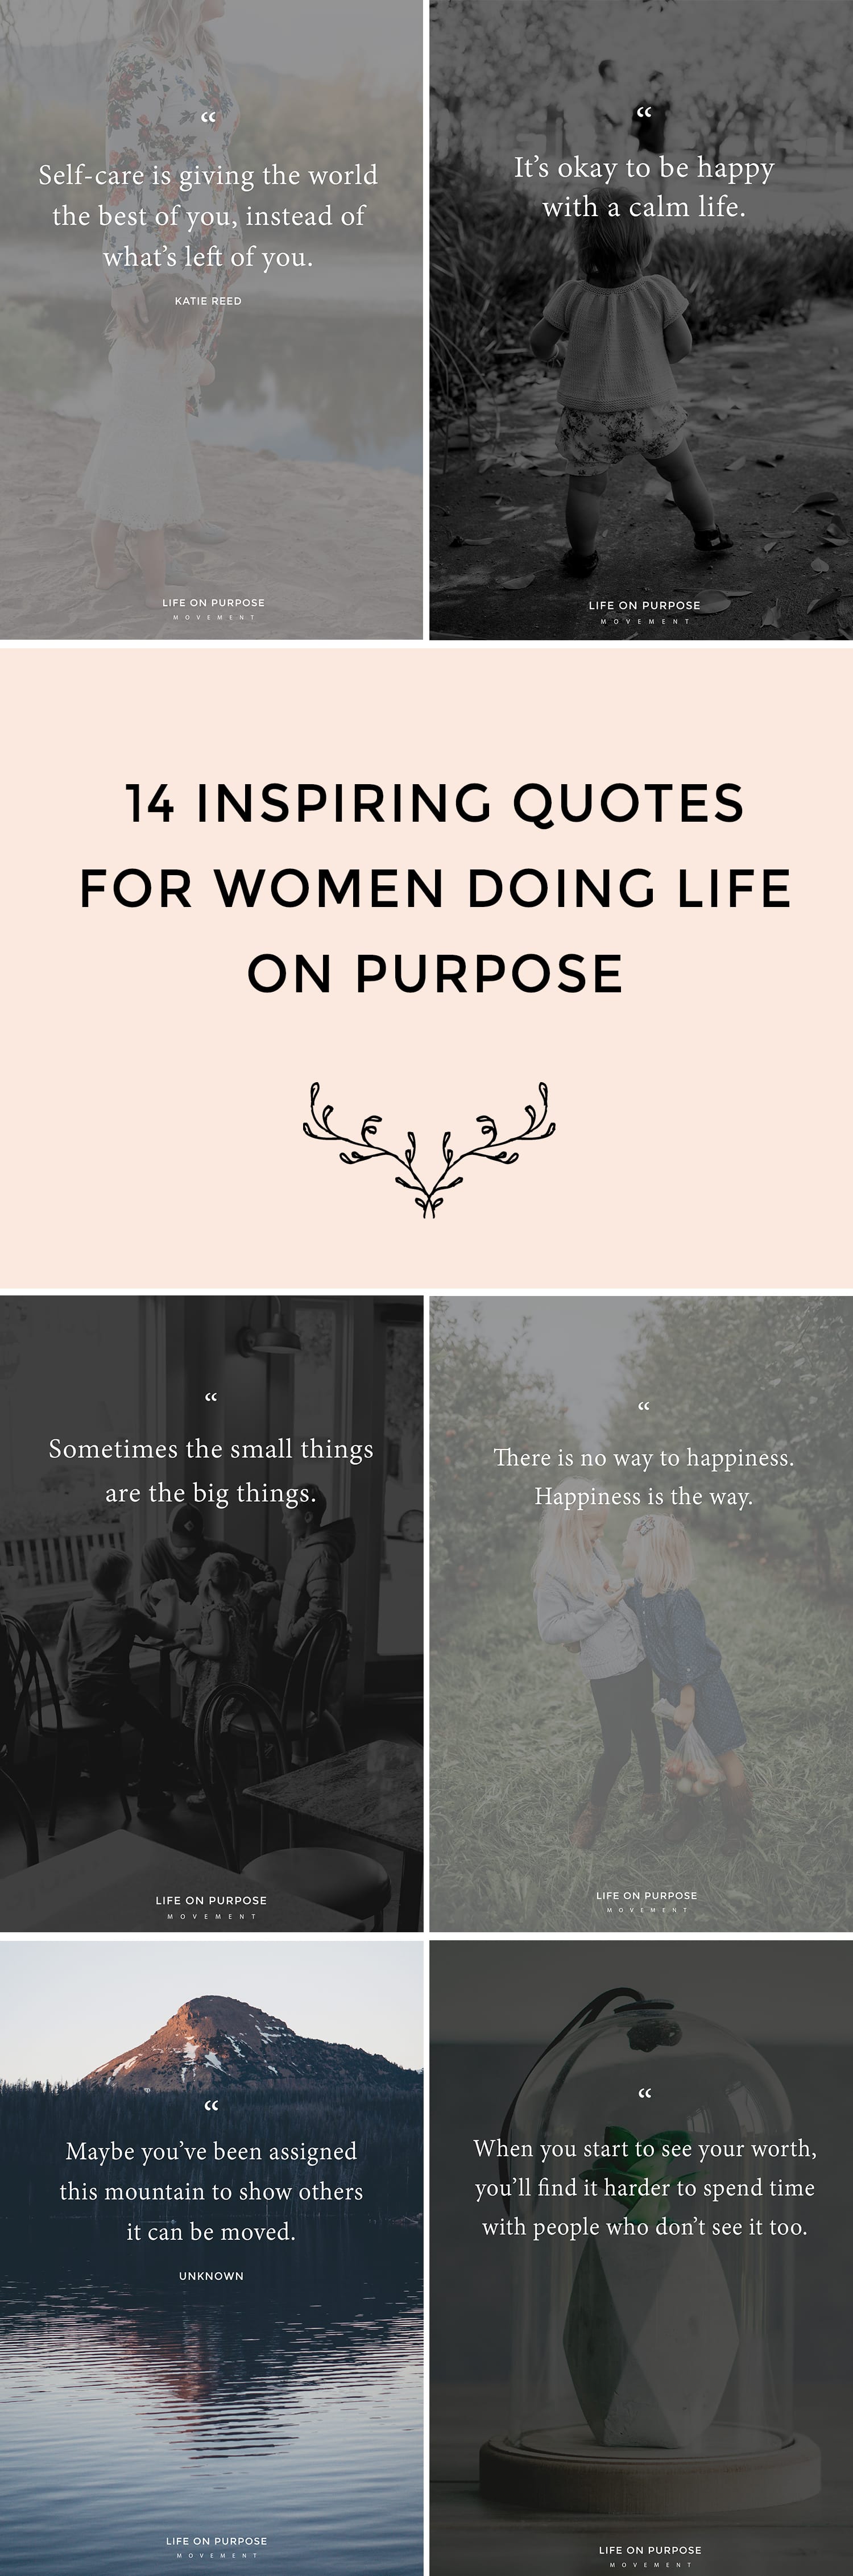 14 Inspiring Quotes For Women Doing Life On Purpose